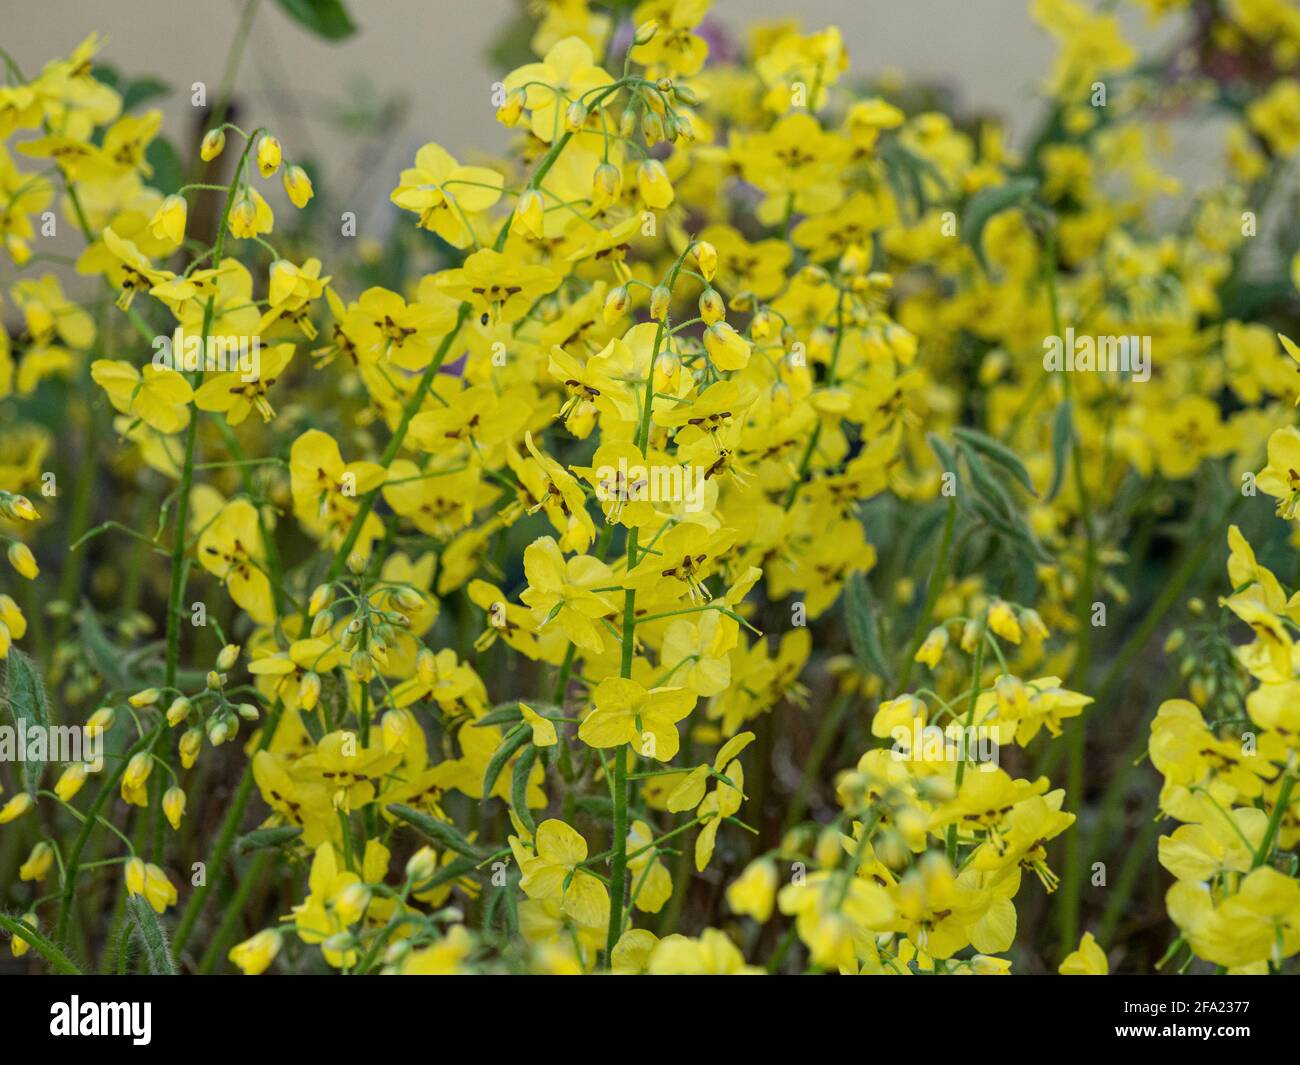 A close up of a large group of the bright yellow flowers of Epimedium pinnatum subsp. colchicum Stock Photo